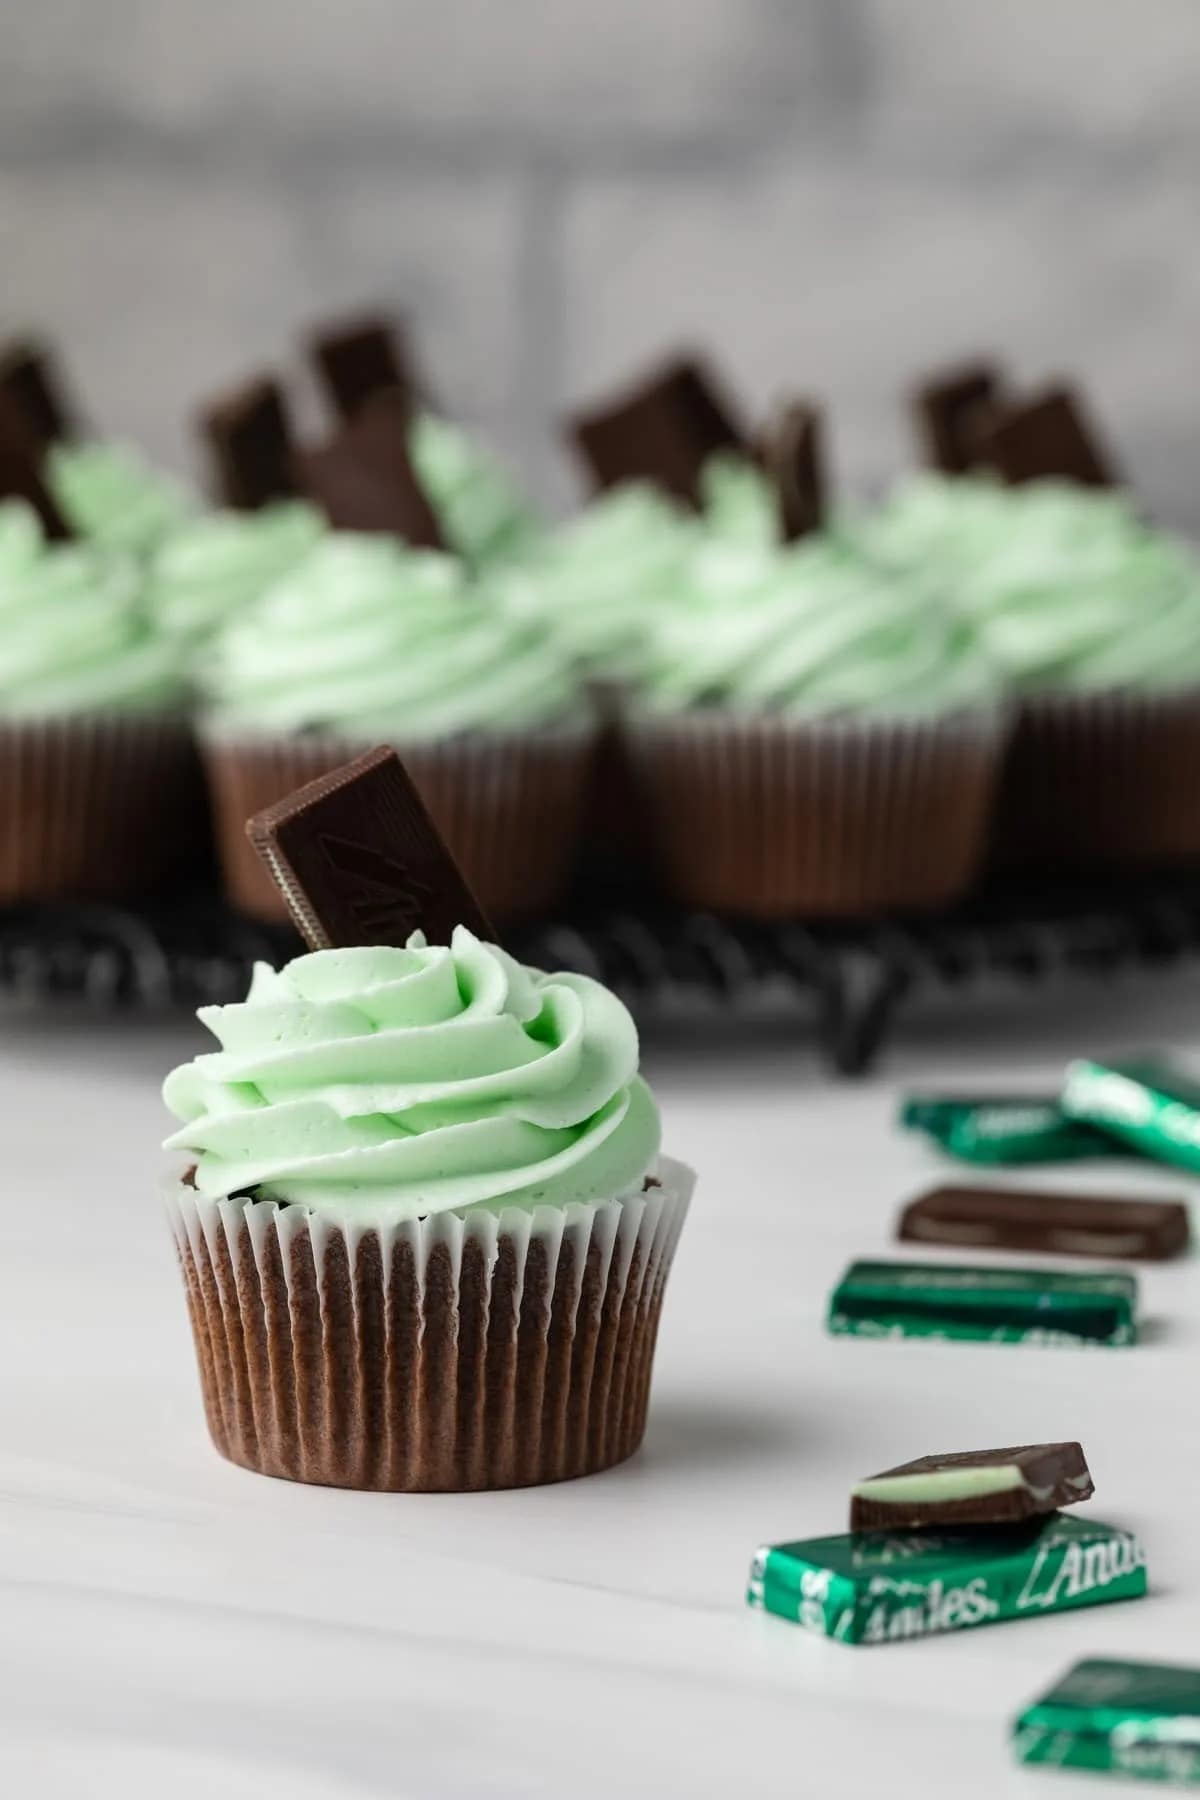 Chocolate cupcakes topped with mint buttercream frosting and a piece of chocolate bar.